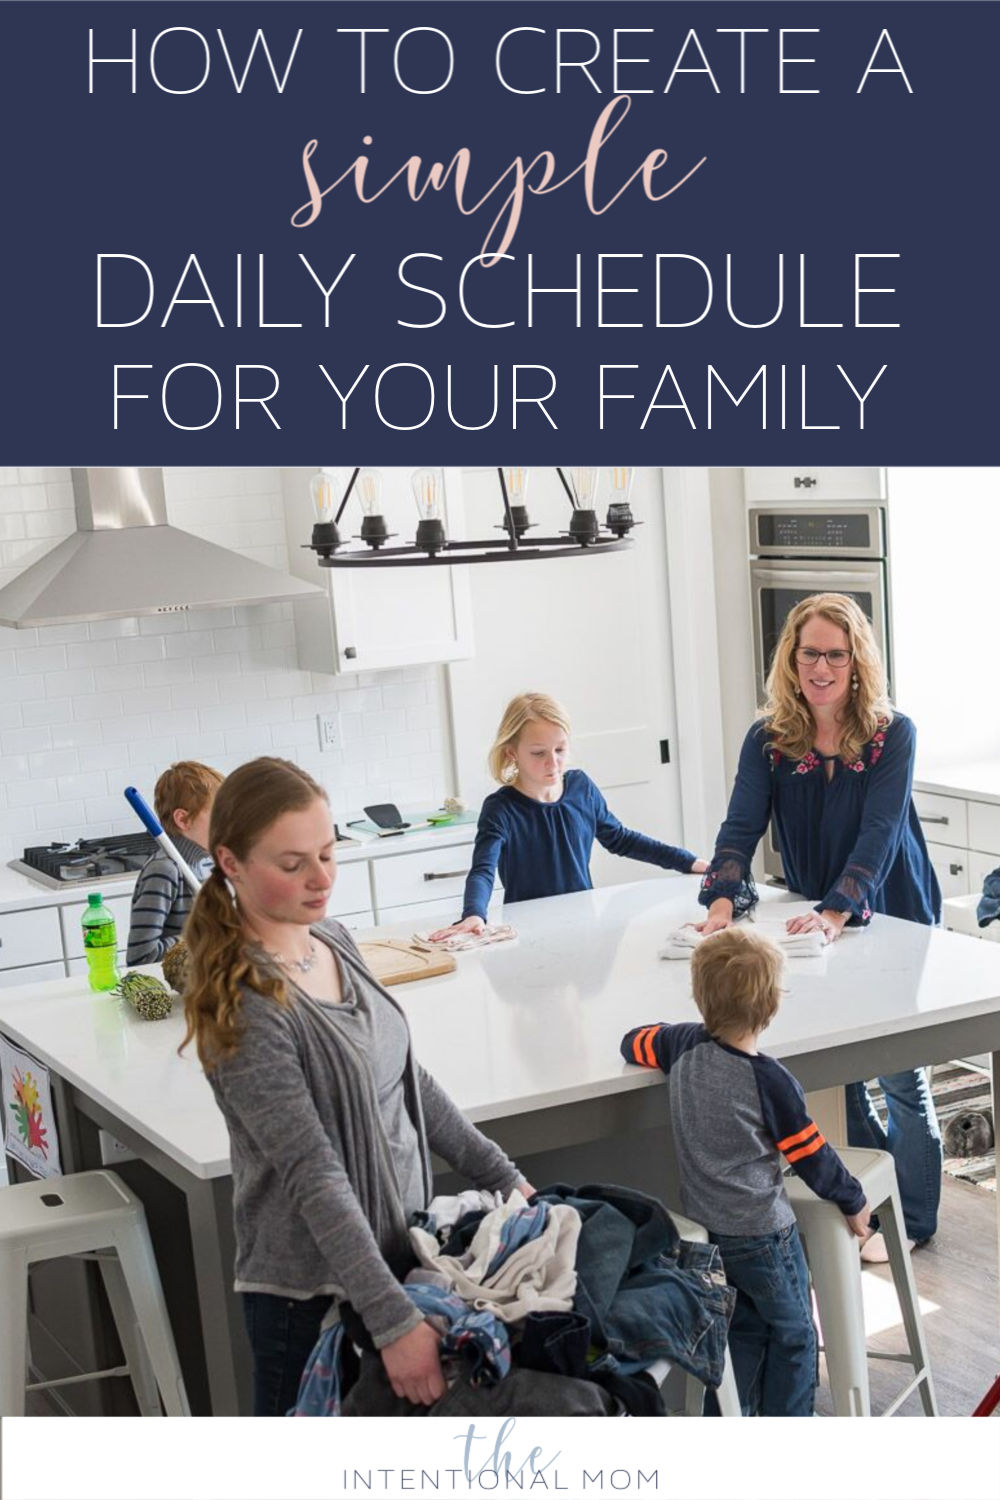 How to Create a Daily Schedule For a Family [Using Time Blocks]